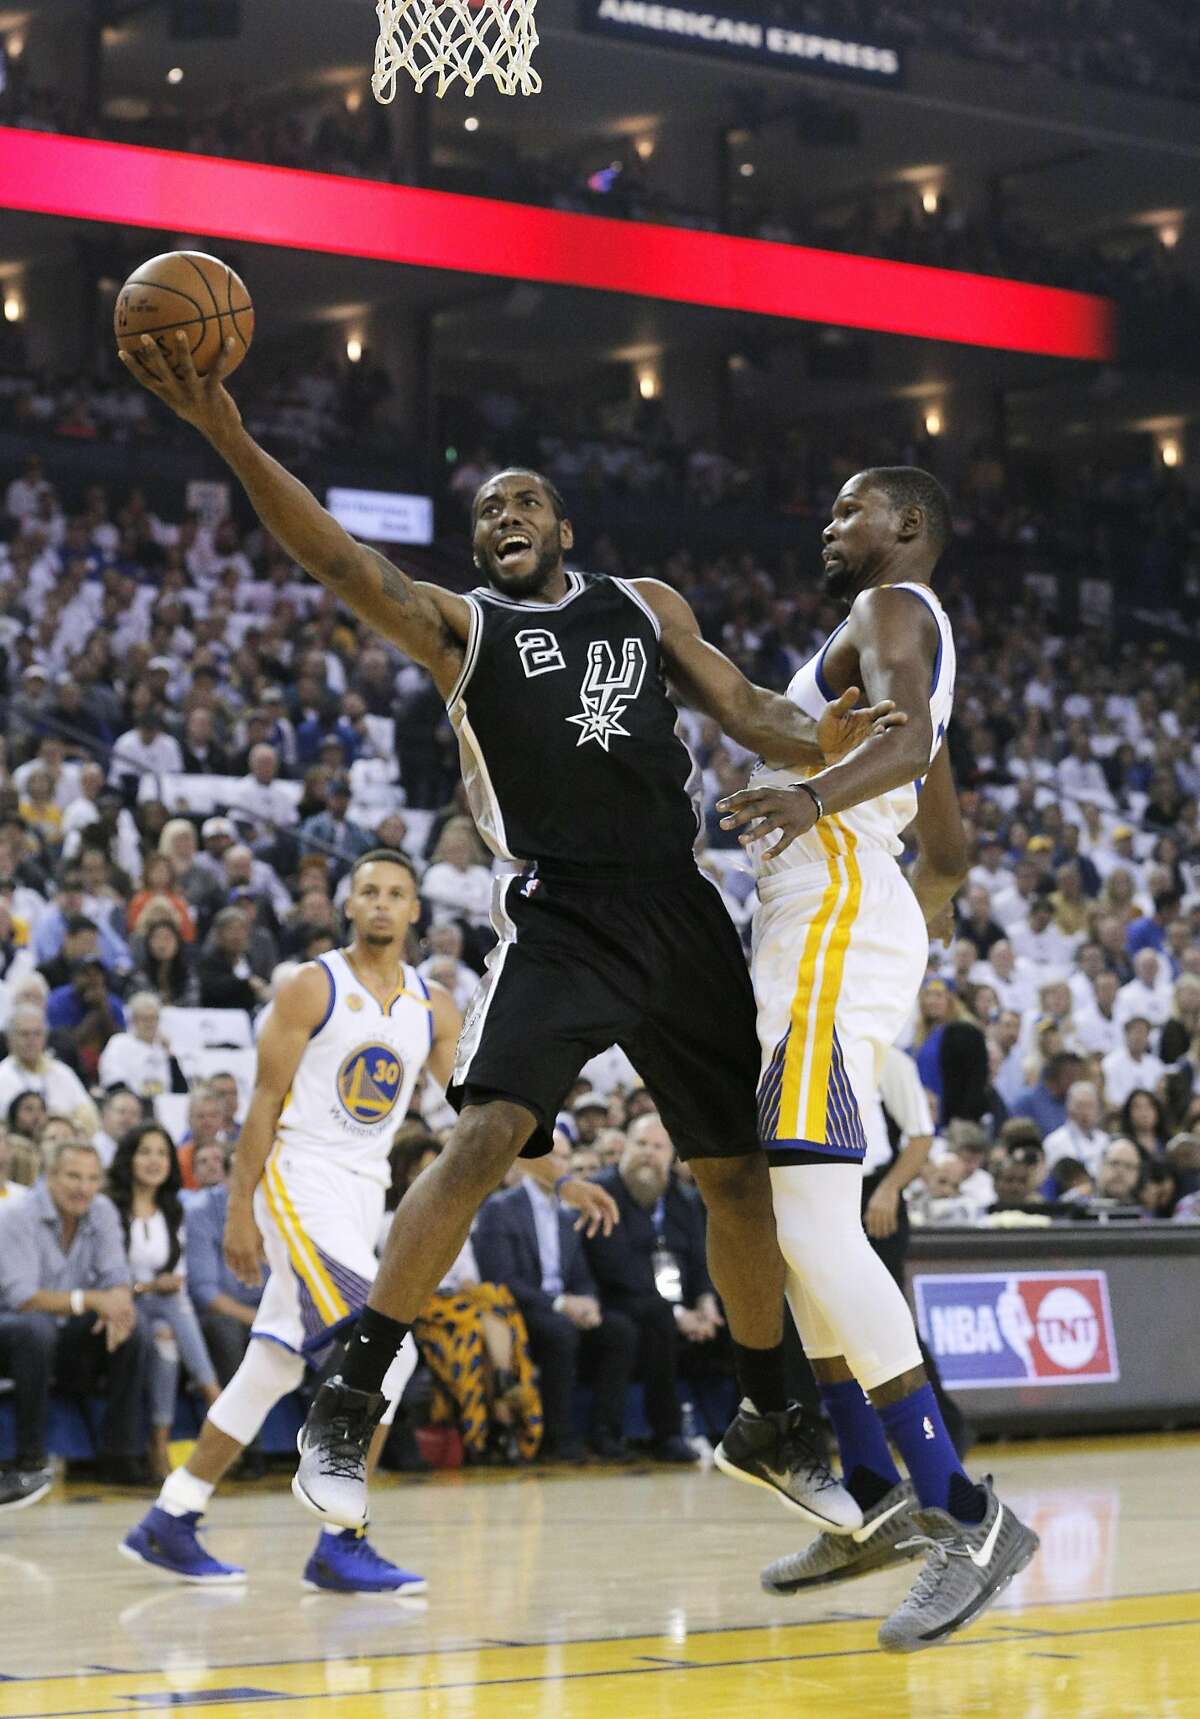 Kawhi Leonard (2) drives to the basket past Kevind Durant (35) in the first half as the Golden State Warriors played the San Antonio Spurs in their season opener at Oracle Arena in Oakland, Calif., on Tuesday, October 25, 2016.